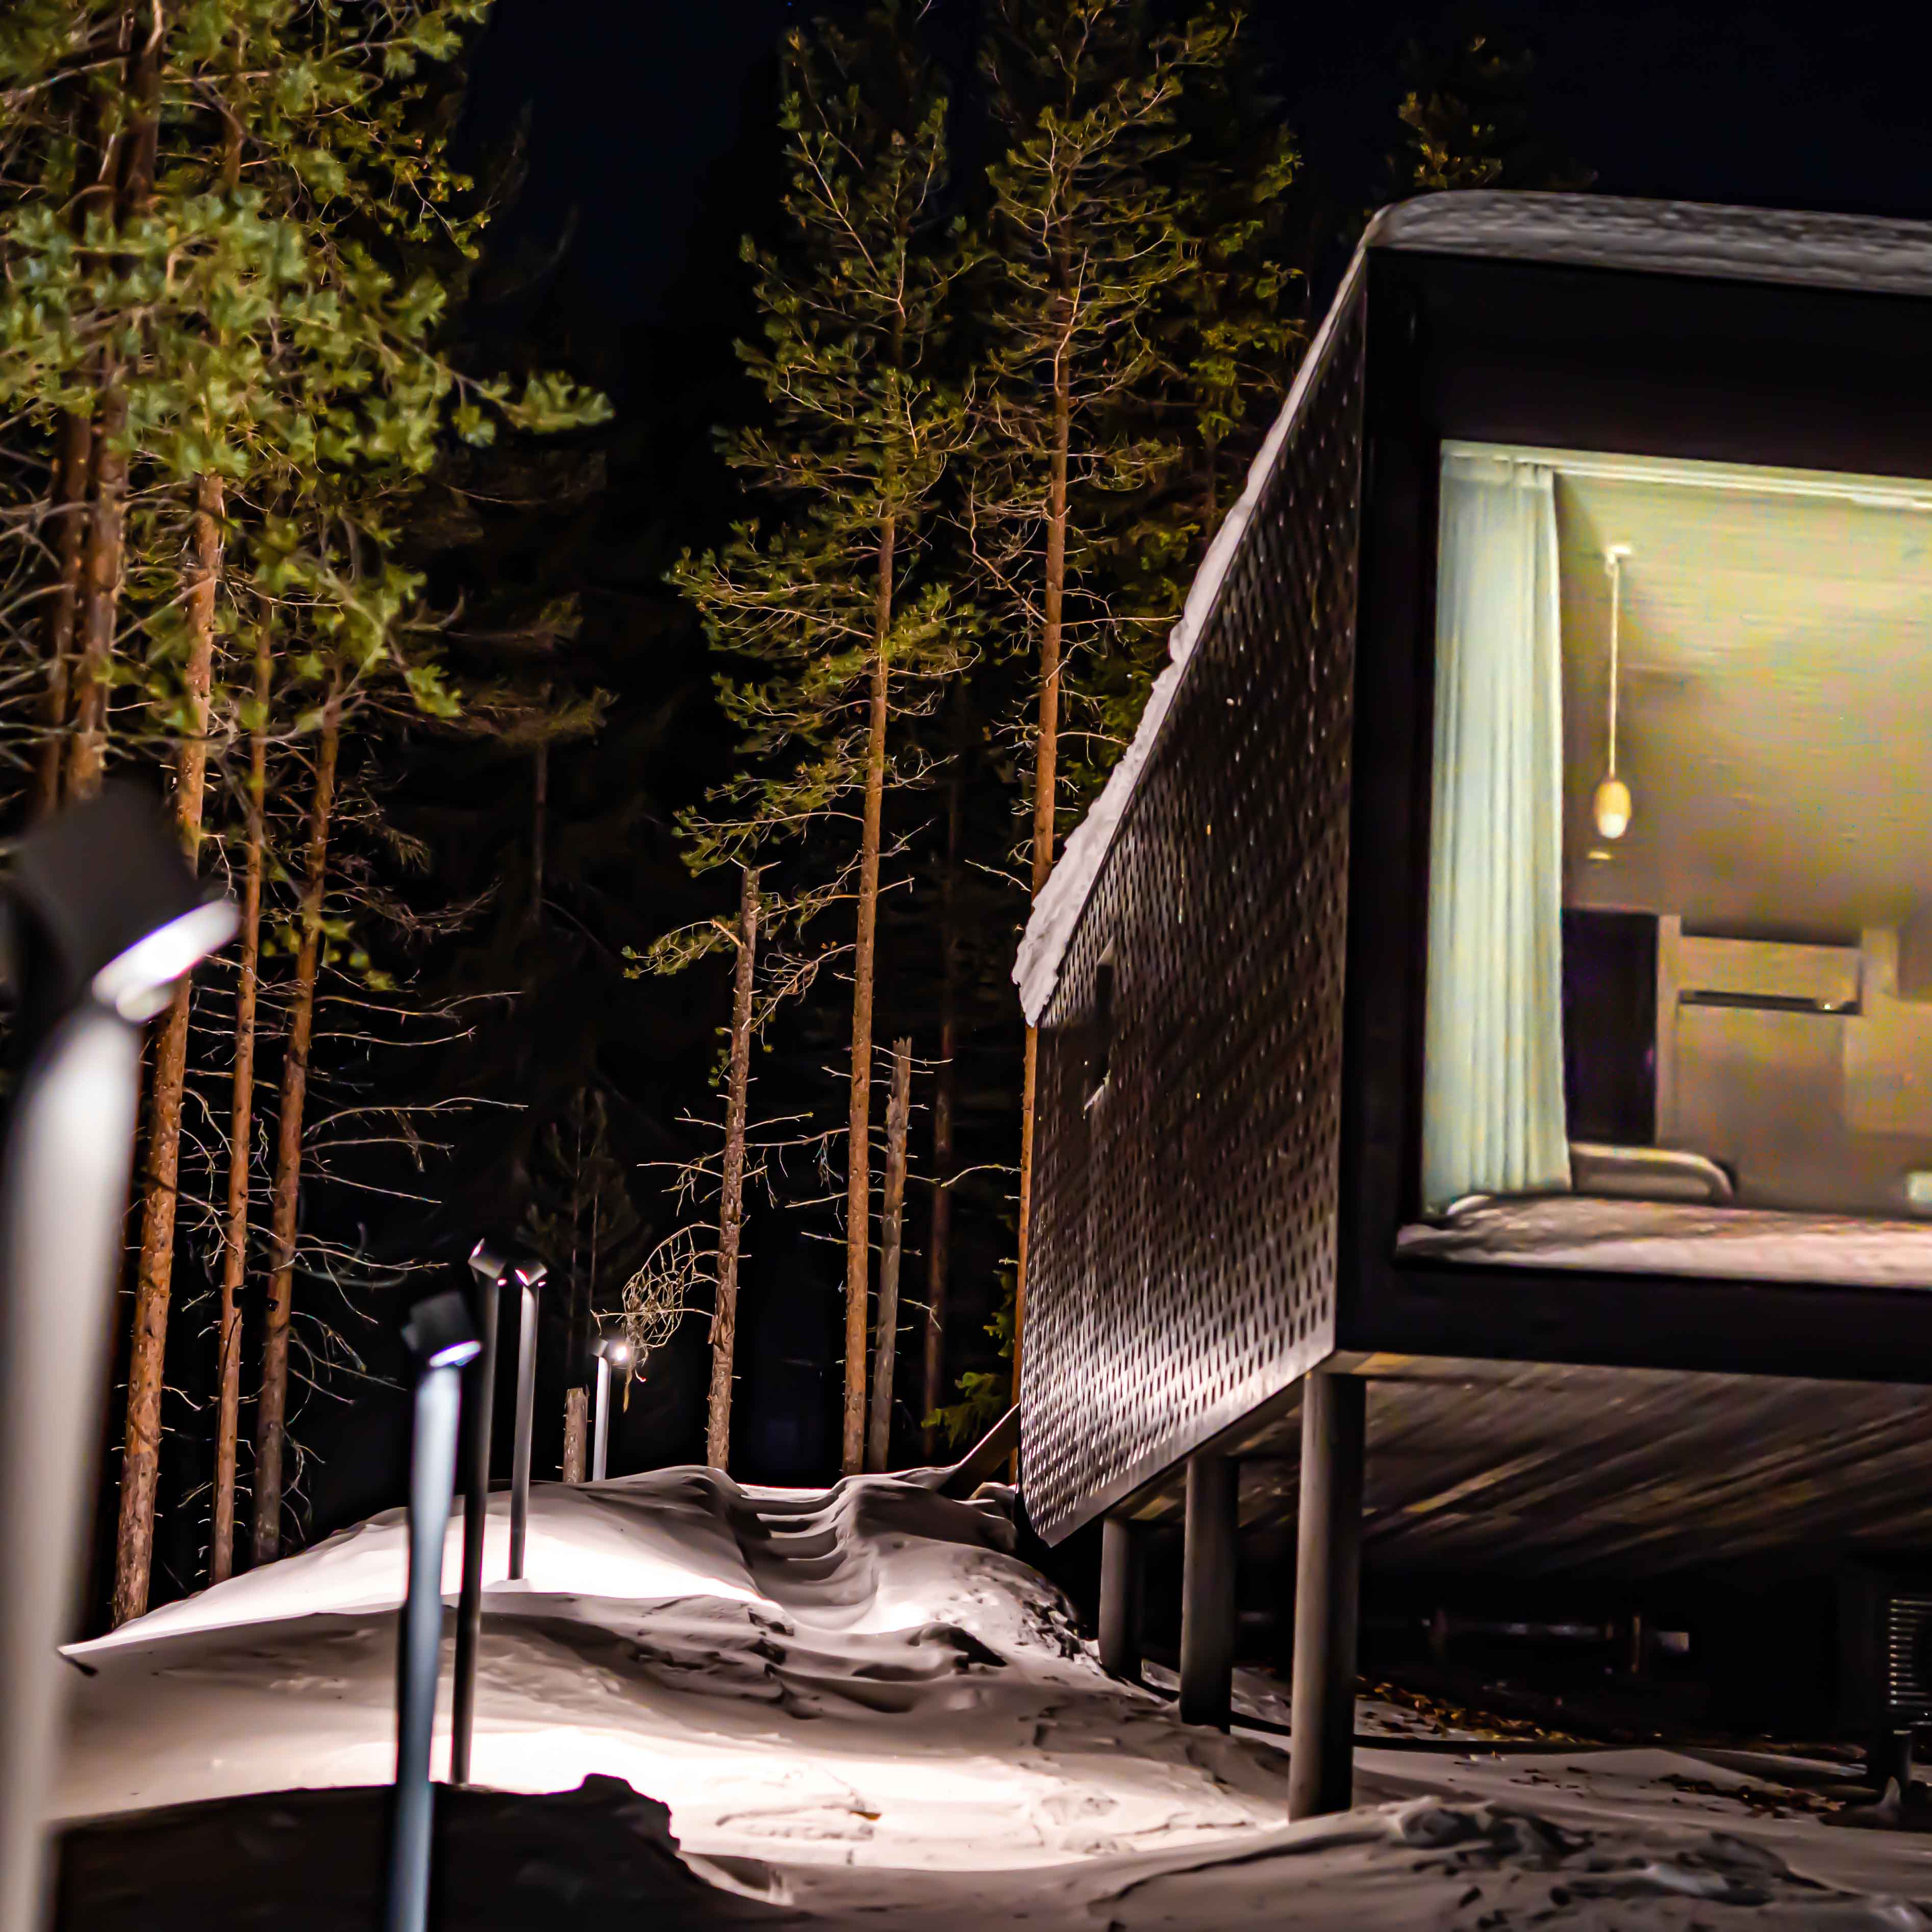 Arctic TreeHouse Hotel lighting in area has been designed to observe the northern lights.